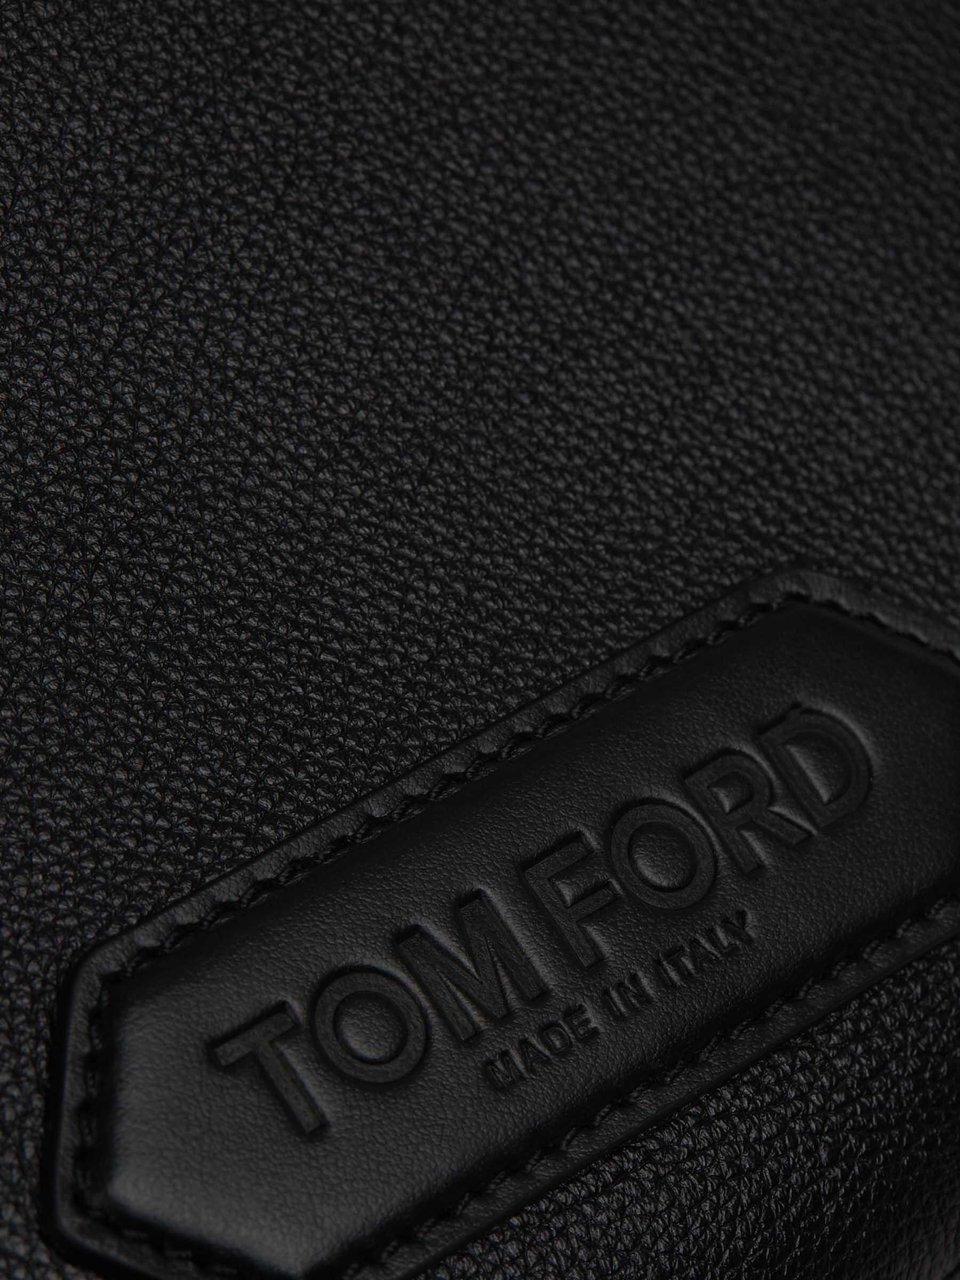 Tom Ford Grained Leather Crossbody Bag Divers